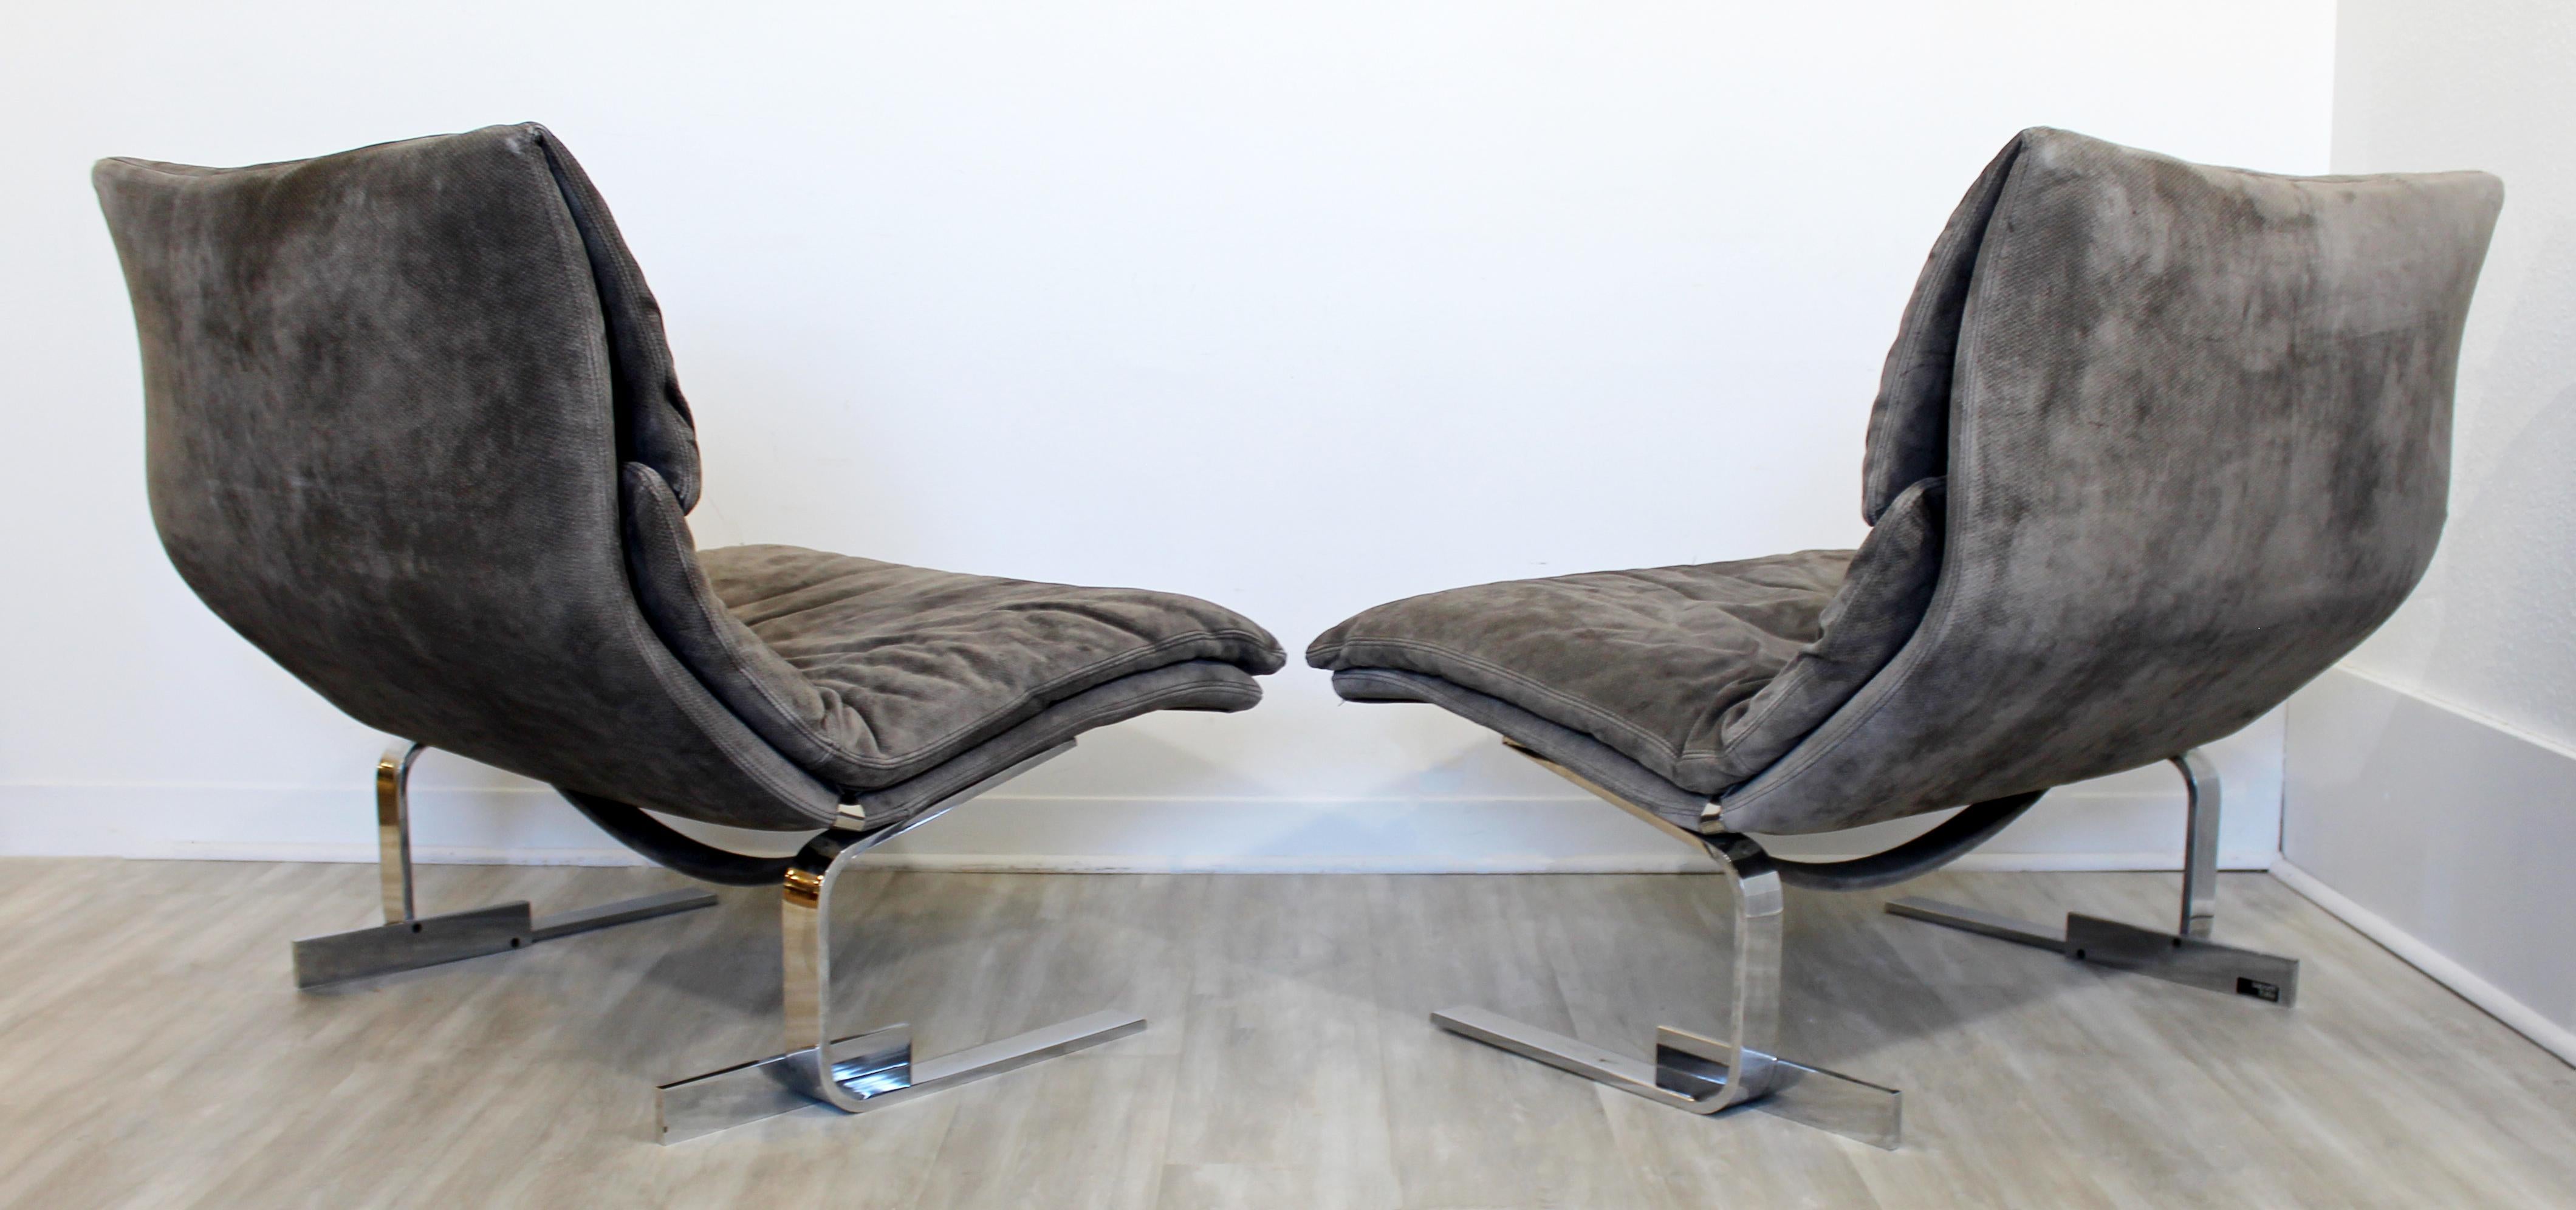 Late 20th Century Mid-Century Modern Giovanni Offredi Saporiti Italy Pair Wave Chairs 1970s